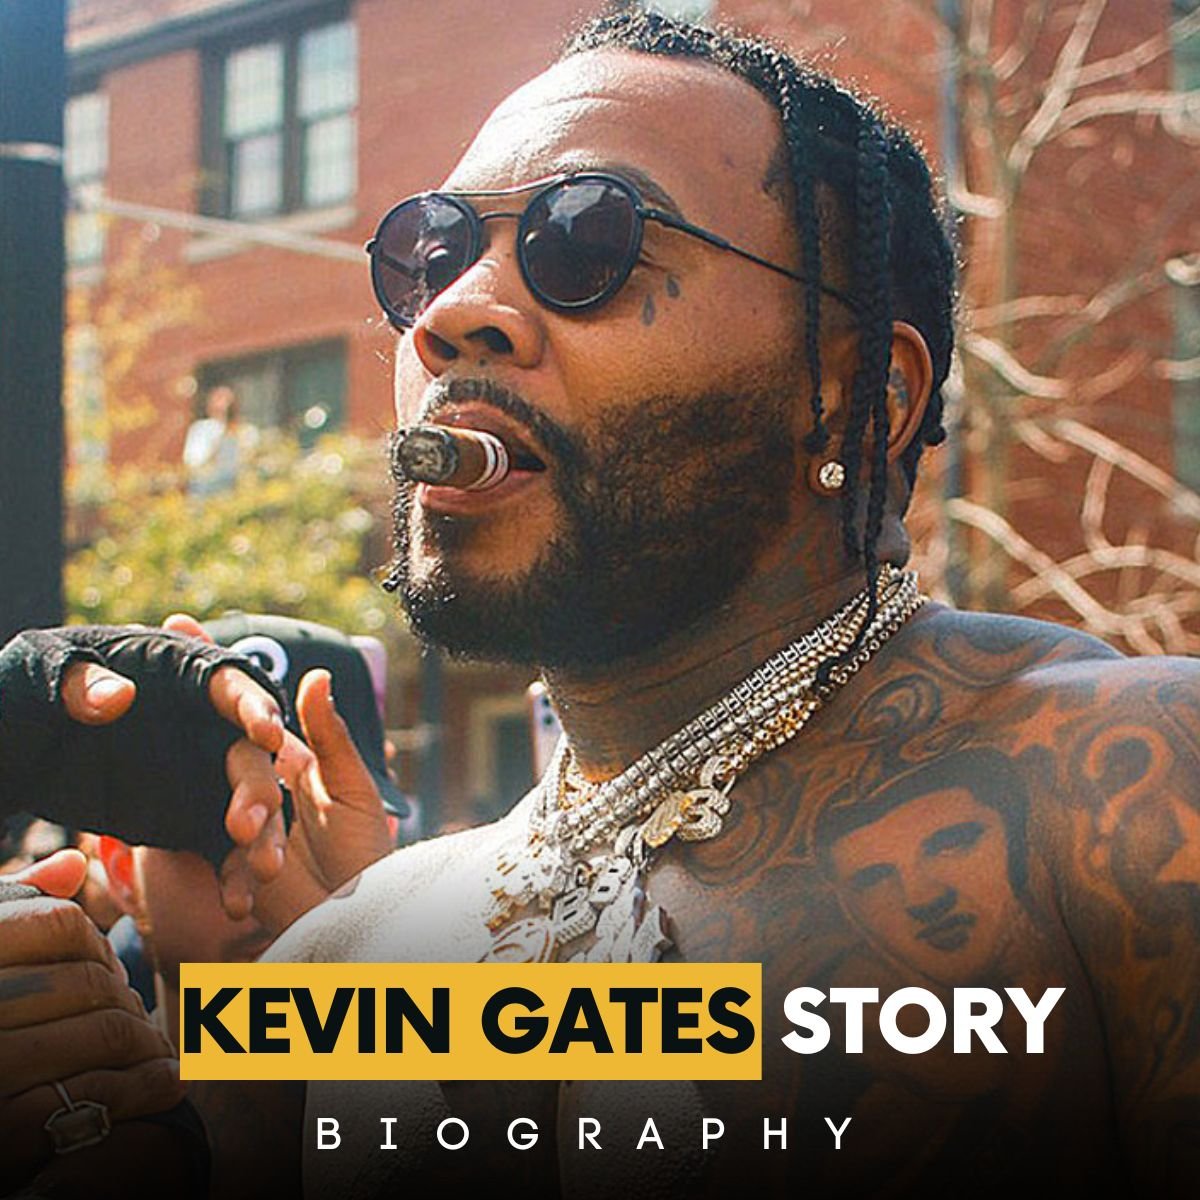 Why You Shouldn’t Check Kevin Gates Story – The Viral Hype on Social Media